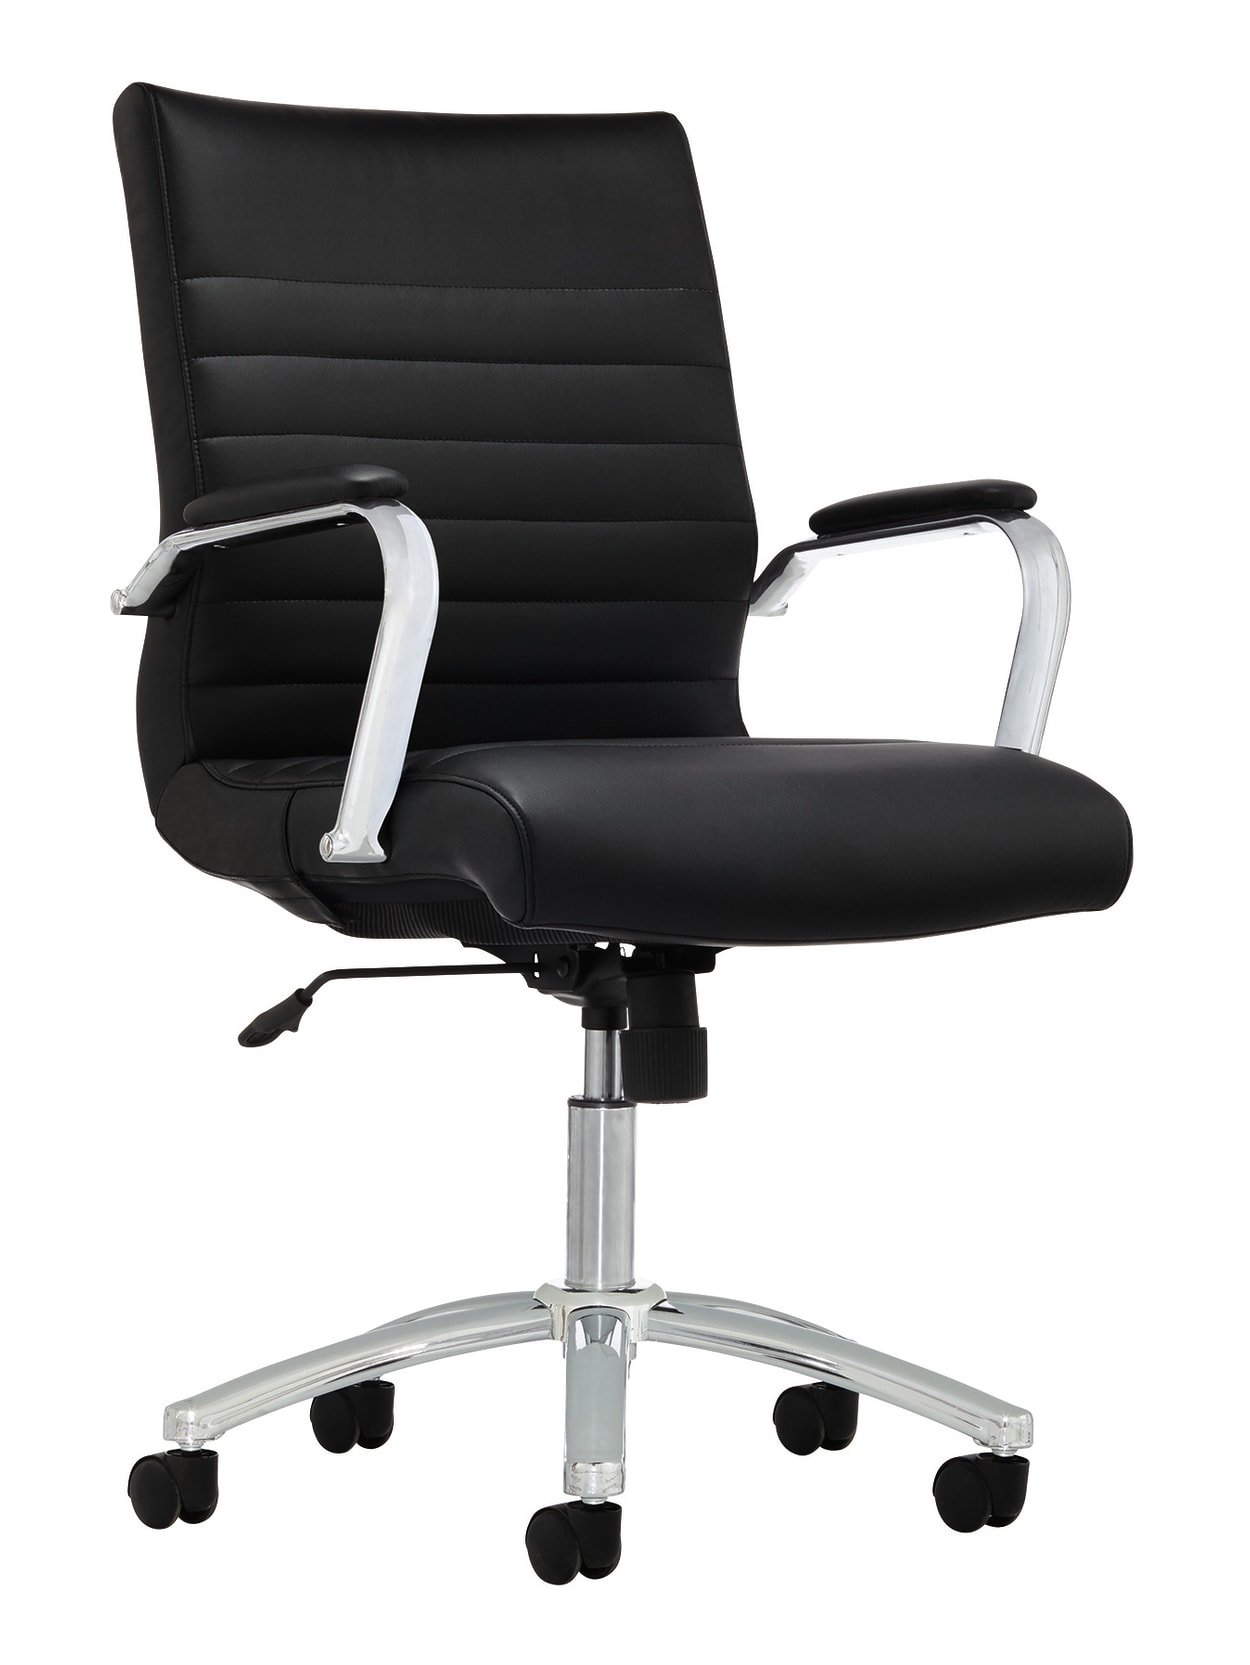 Realspace Office Chair Save $80.00 At Office Depot!! #deannasdeals – I